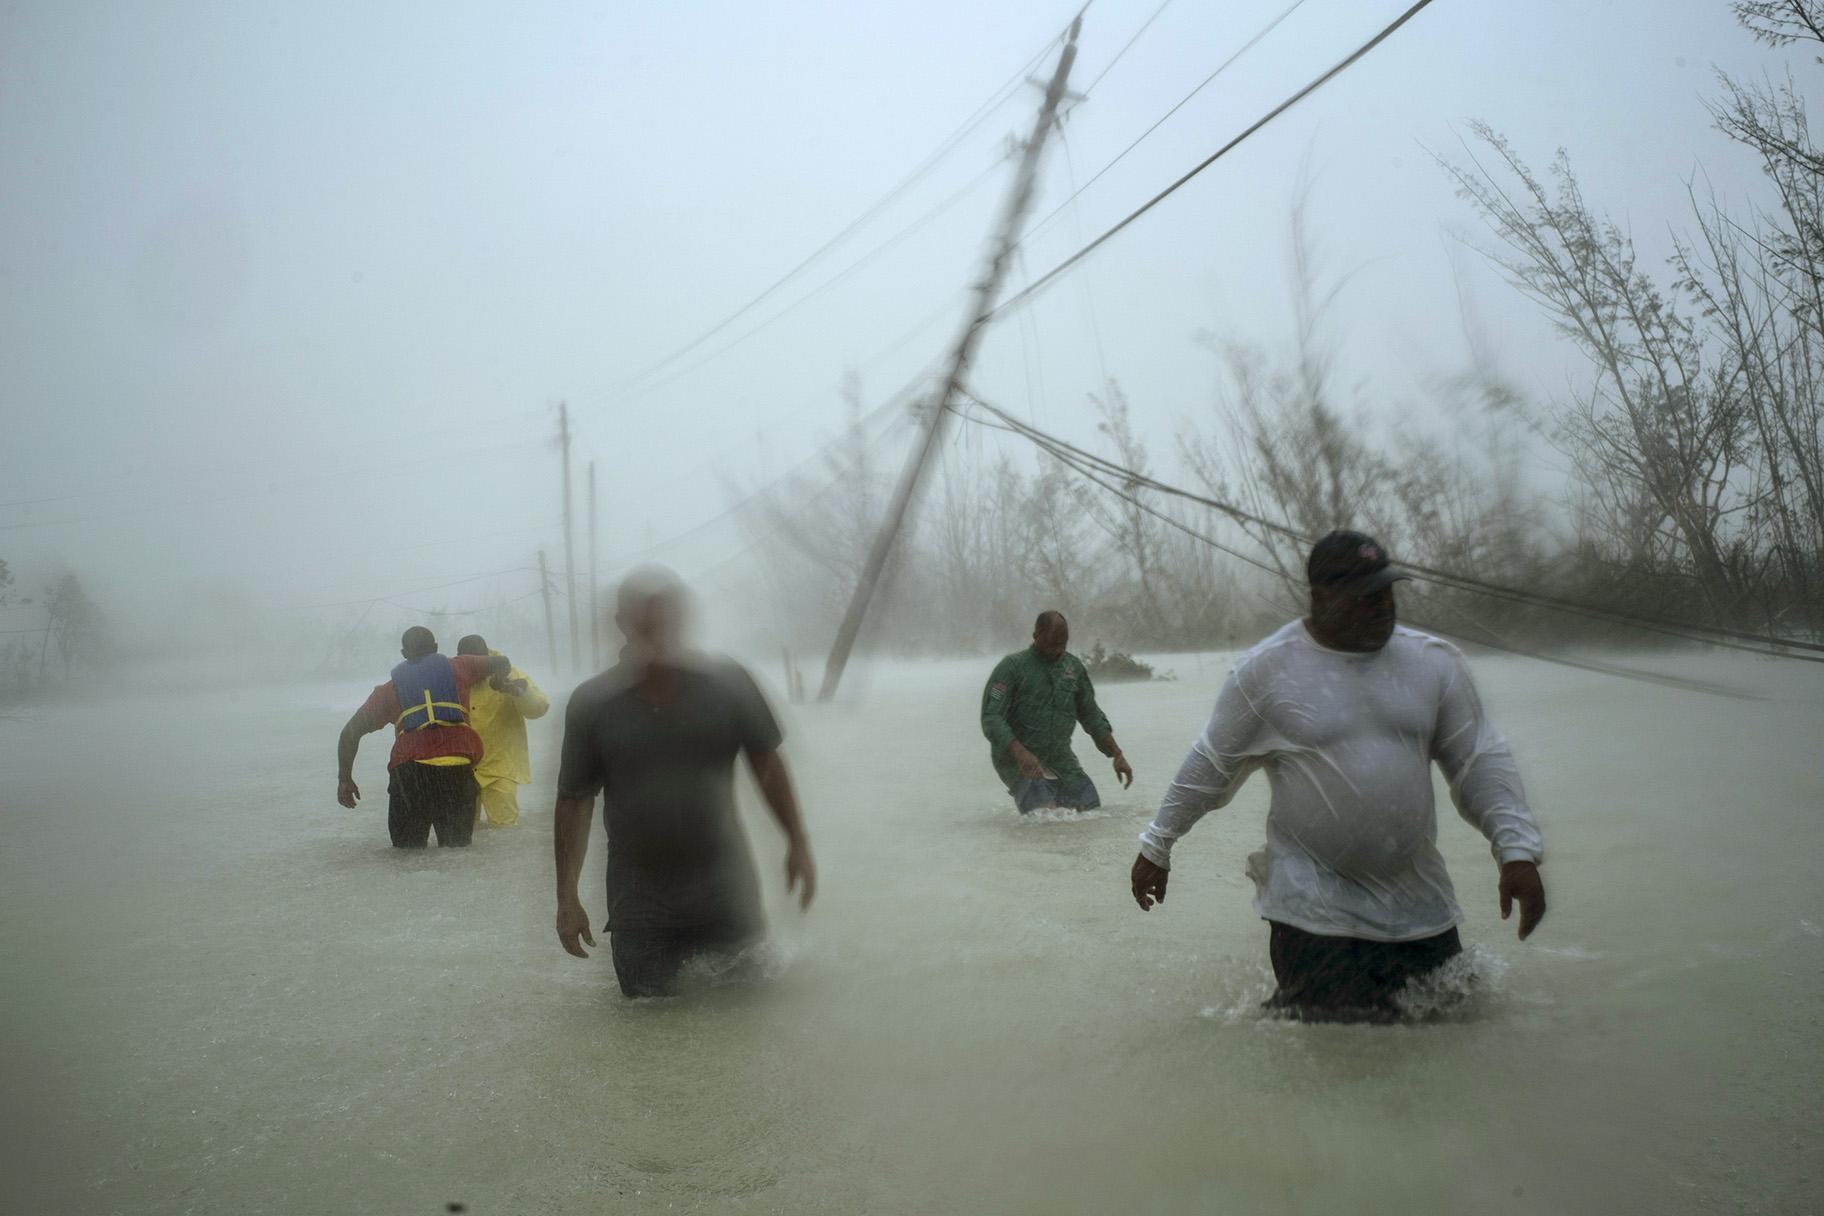 Volunteers walk under the wind and rain from Hurricane Dorian through a flooded road as they work to rescue families near the Causarina bridge in Freeport, Grand Bahama, Bahamas on Tuesday, Sept. 3, 2019. The storm’s punishing winds and muddy brown floodwaters devastated thousands of homes, crippled hospitals and trapped people in attics. (AP Photo / Ramon Espinosa)